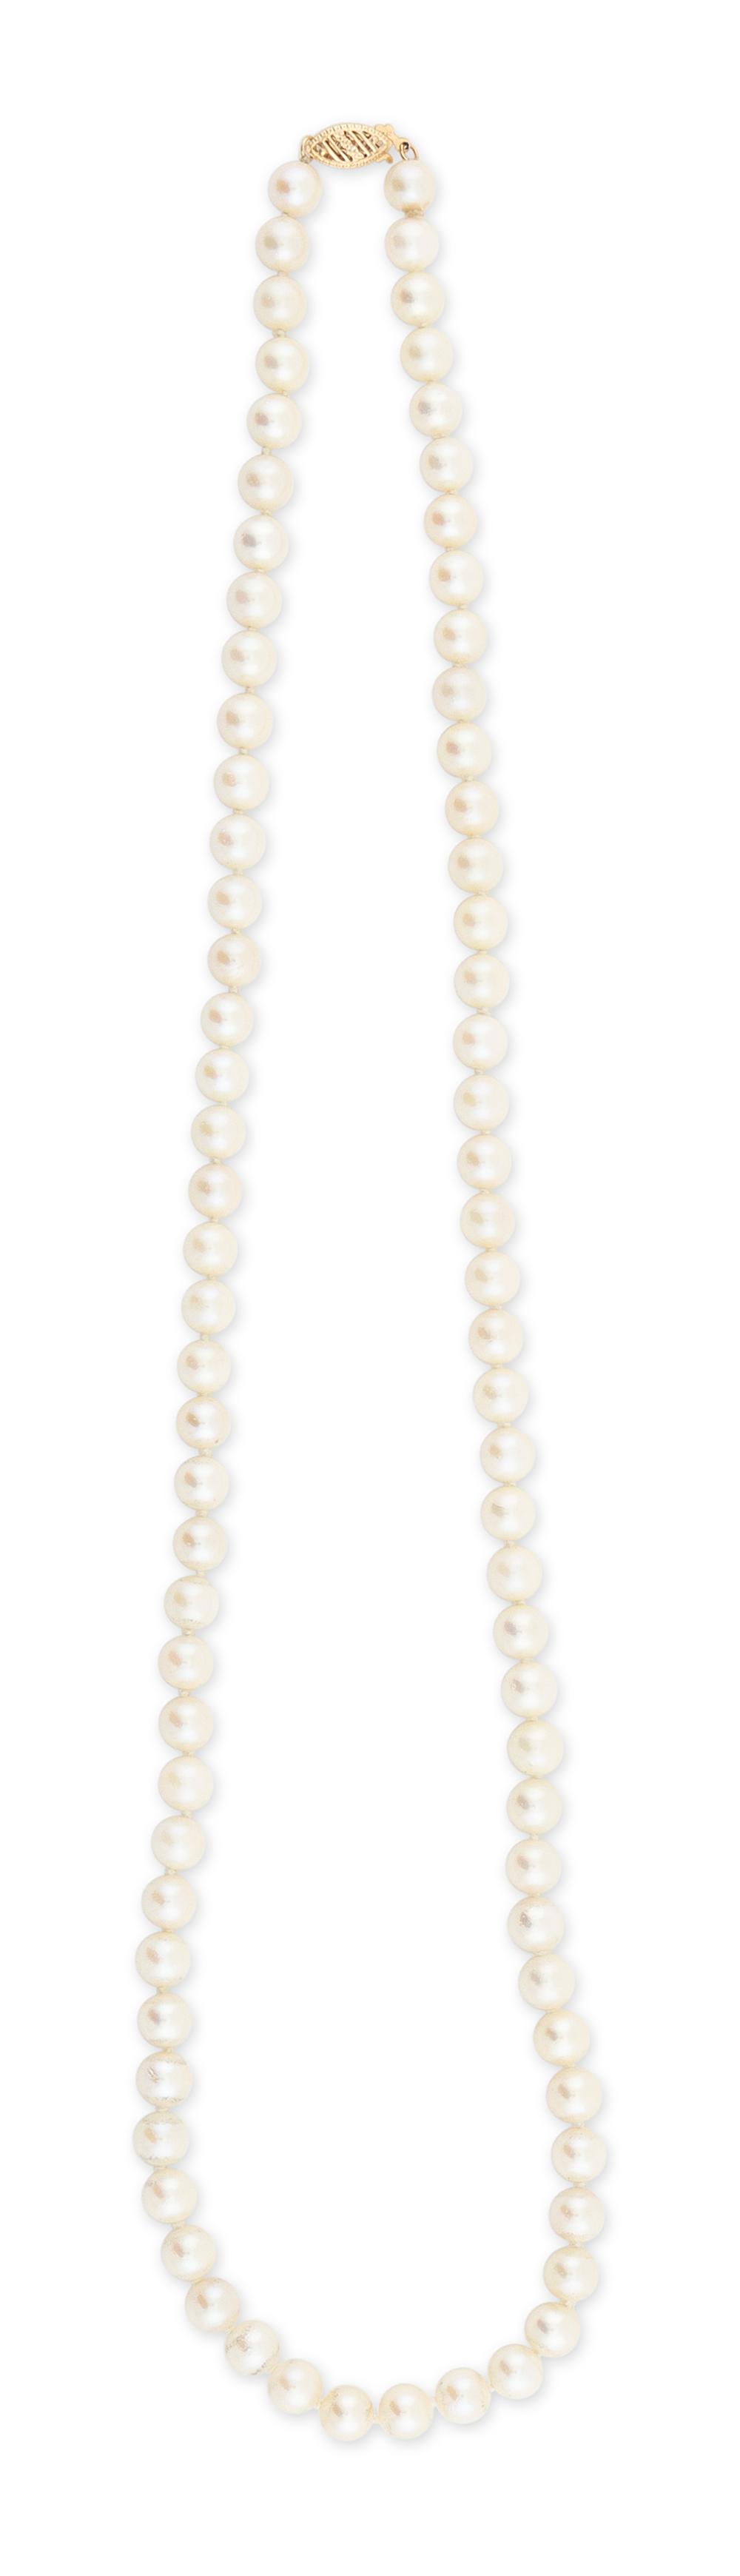 14KT GOLD AND CULTURED PEARL NECKLACE14KT 35151d